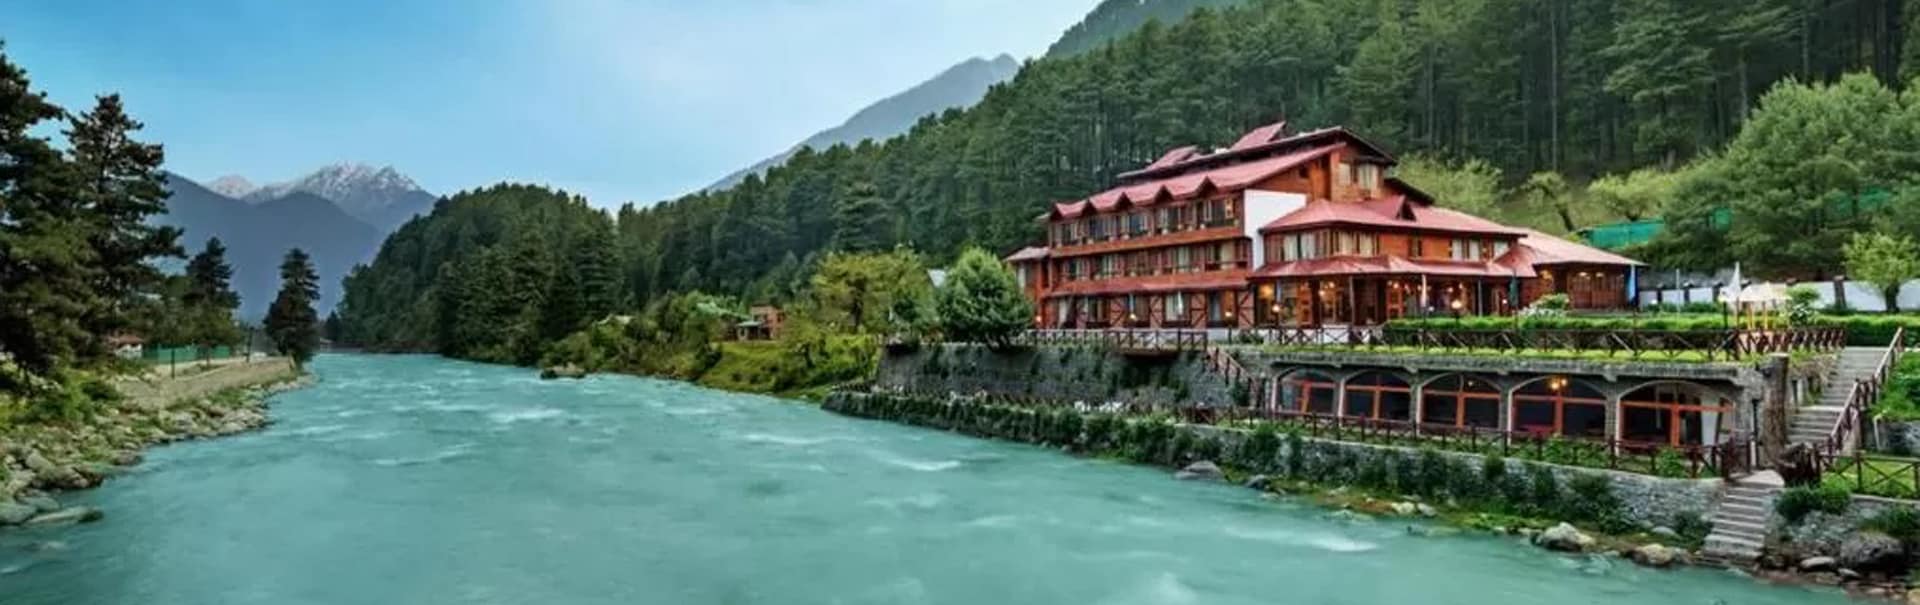 best Kashmir holiday packages